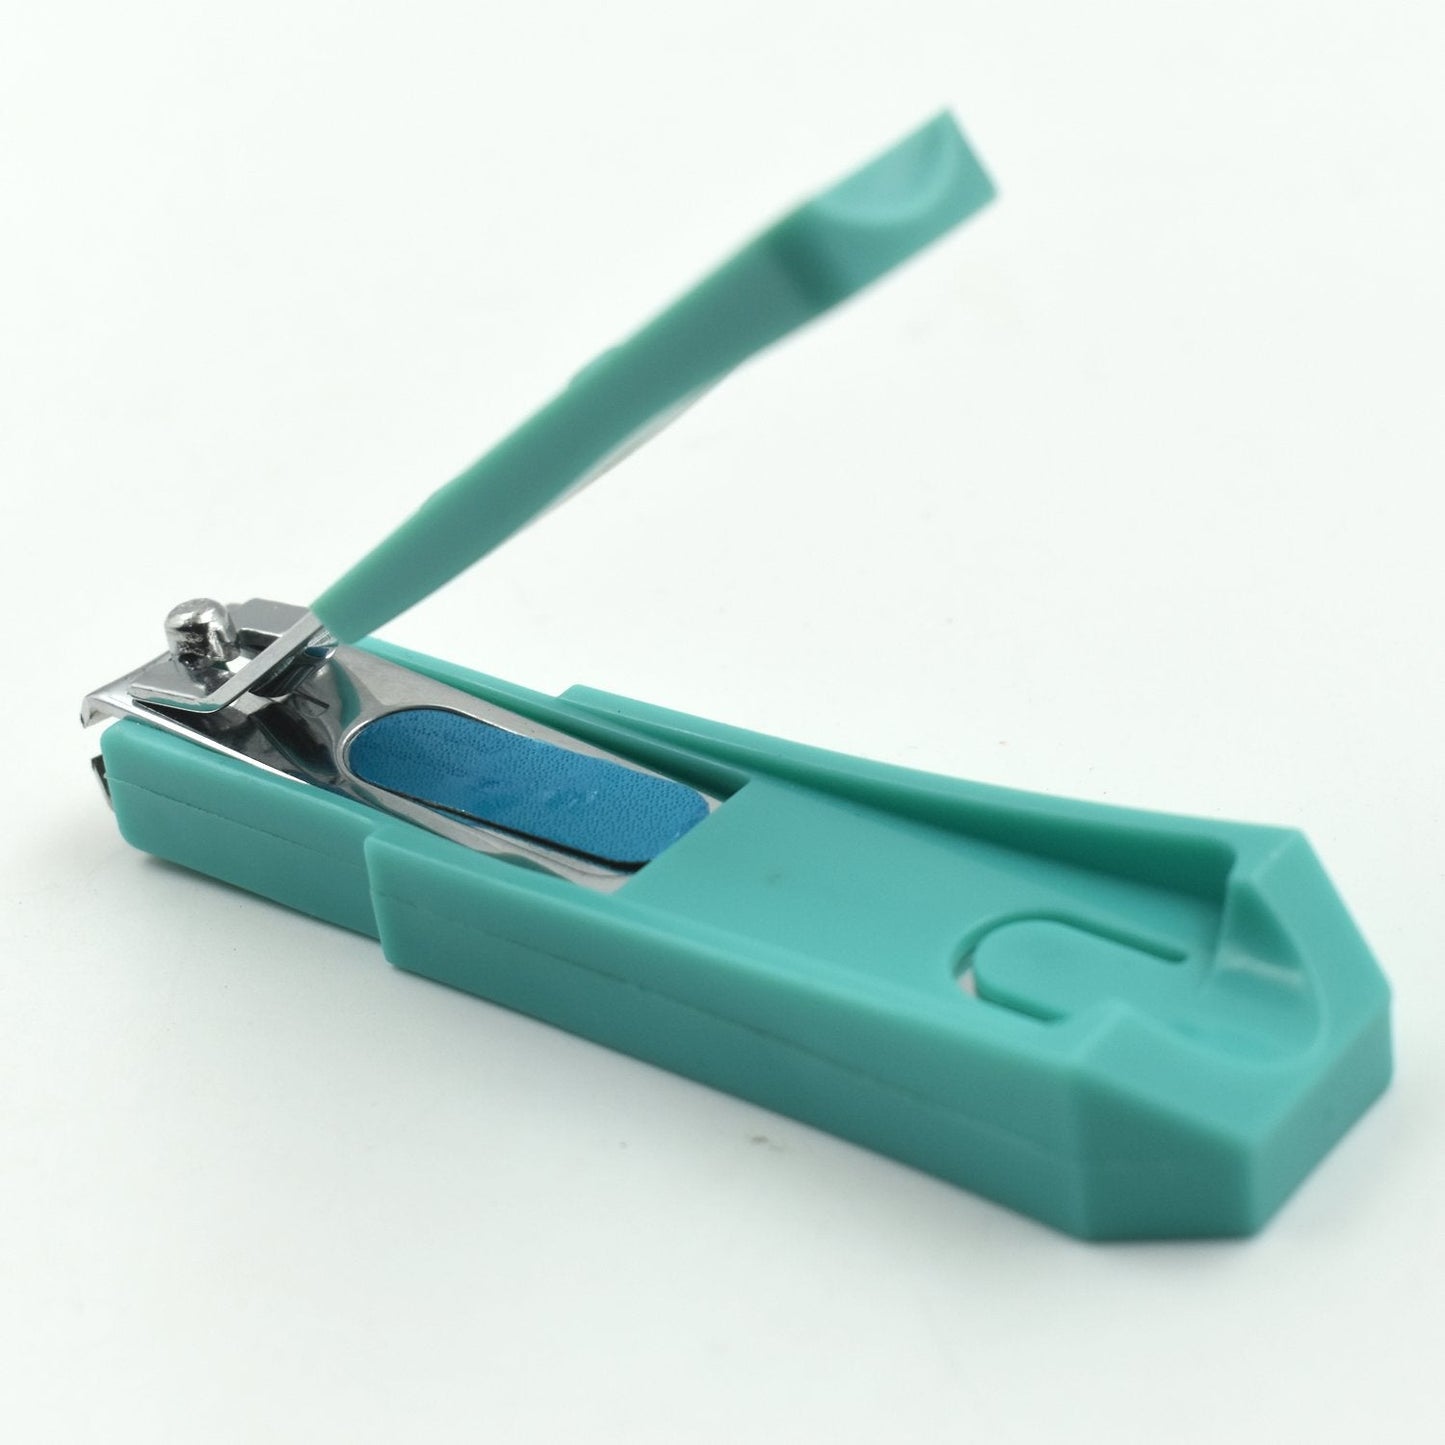 7255 Nail Cutter for Every Age Group (1pc) 